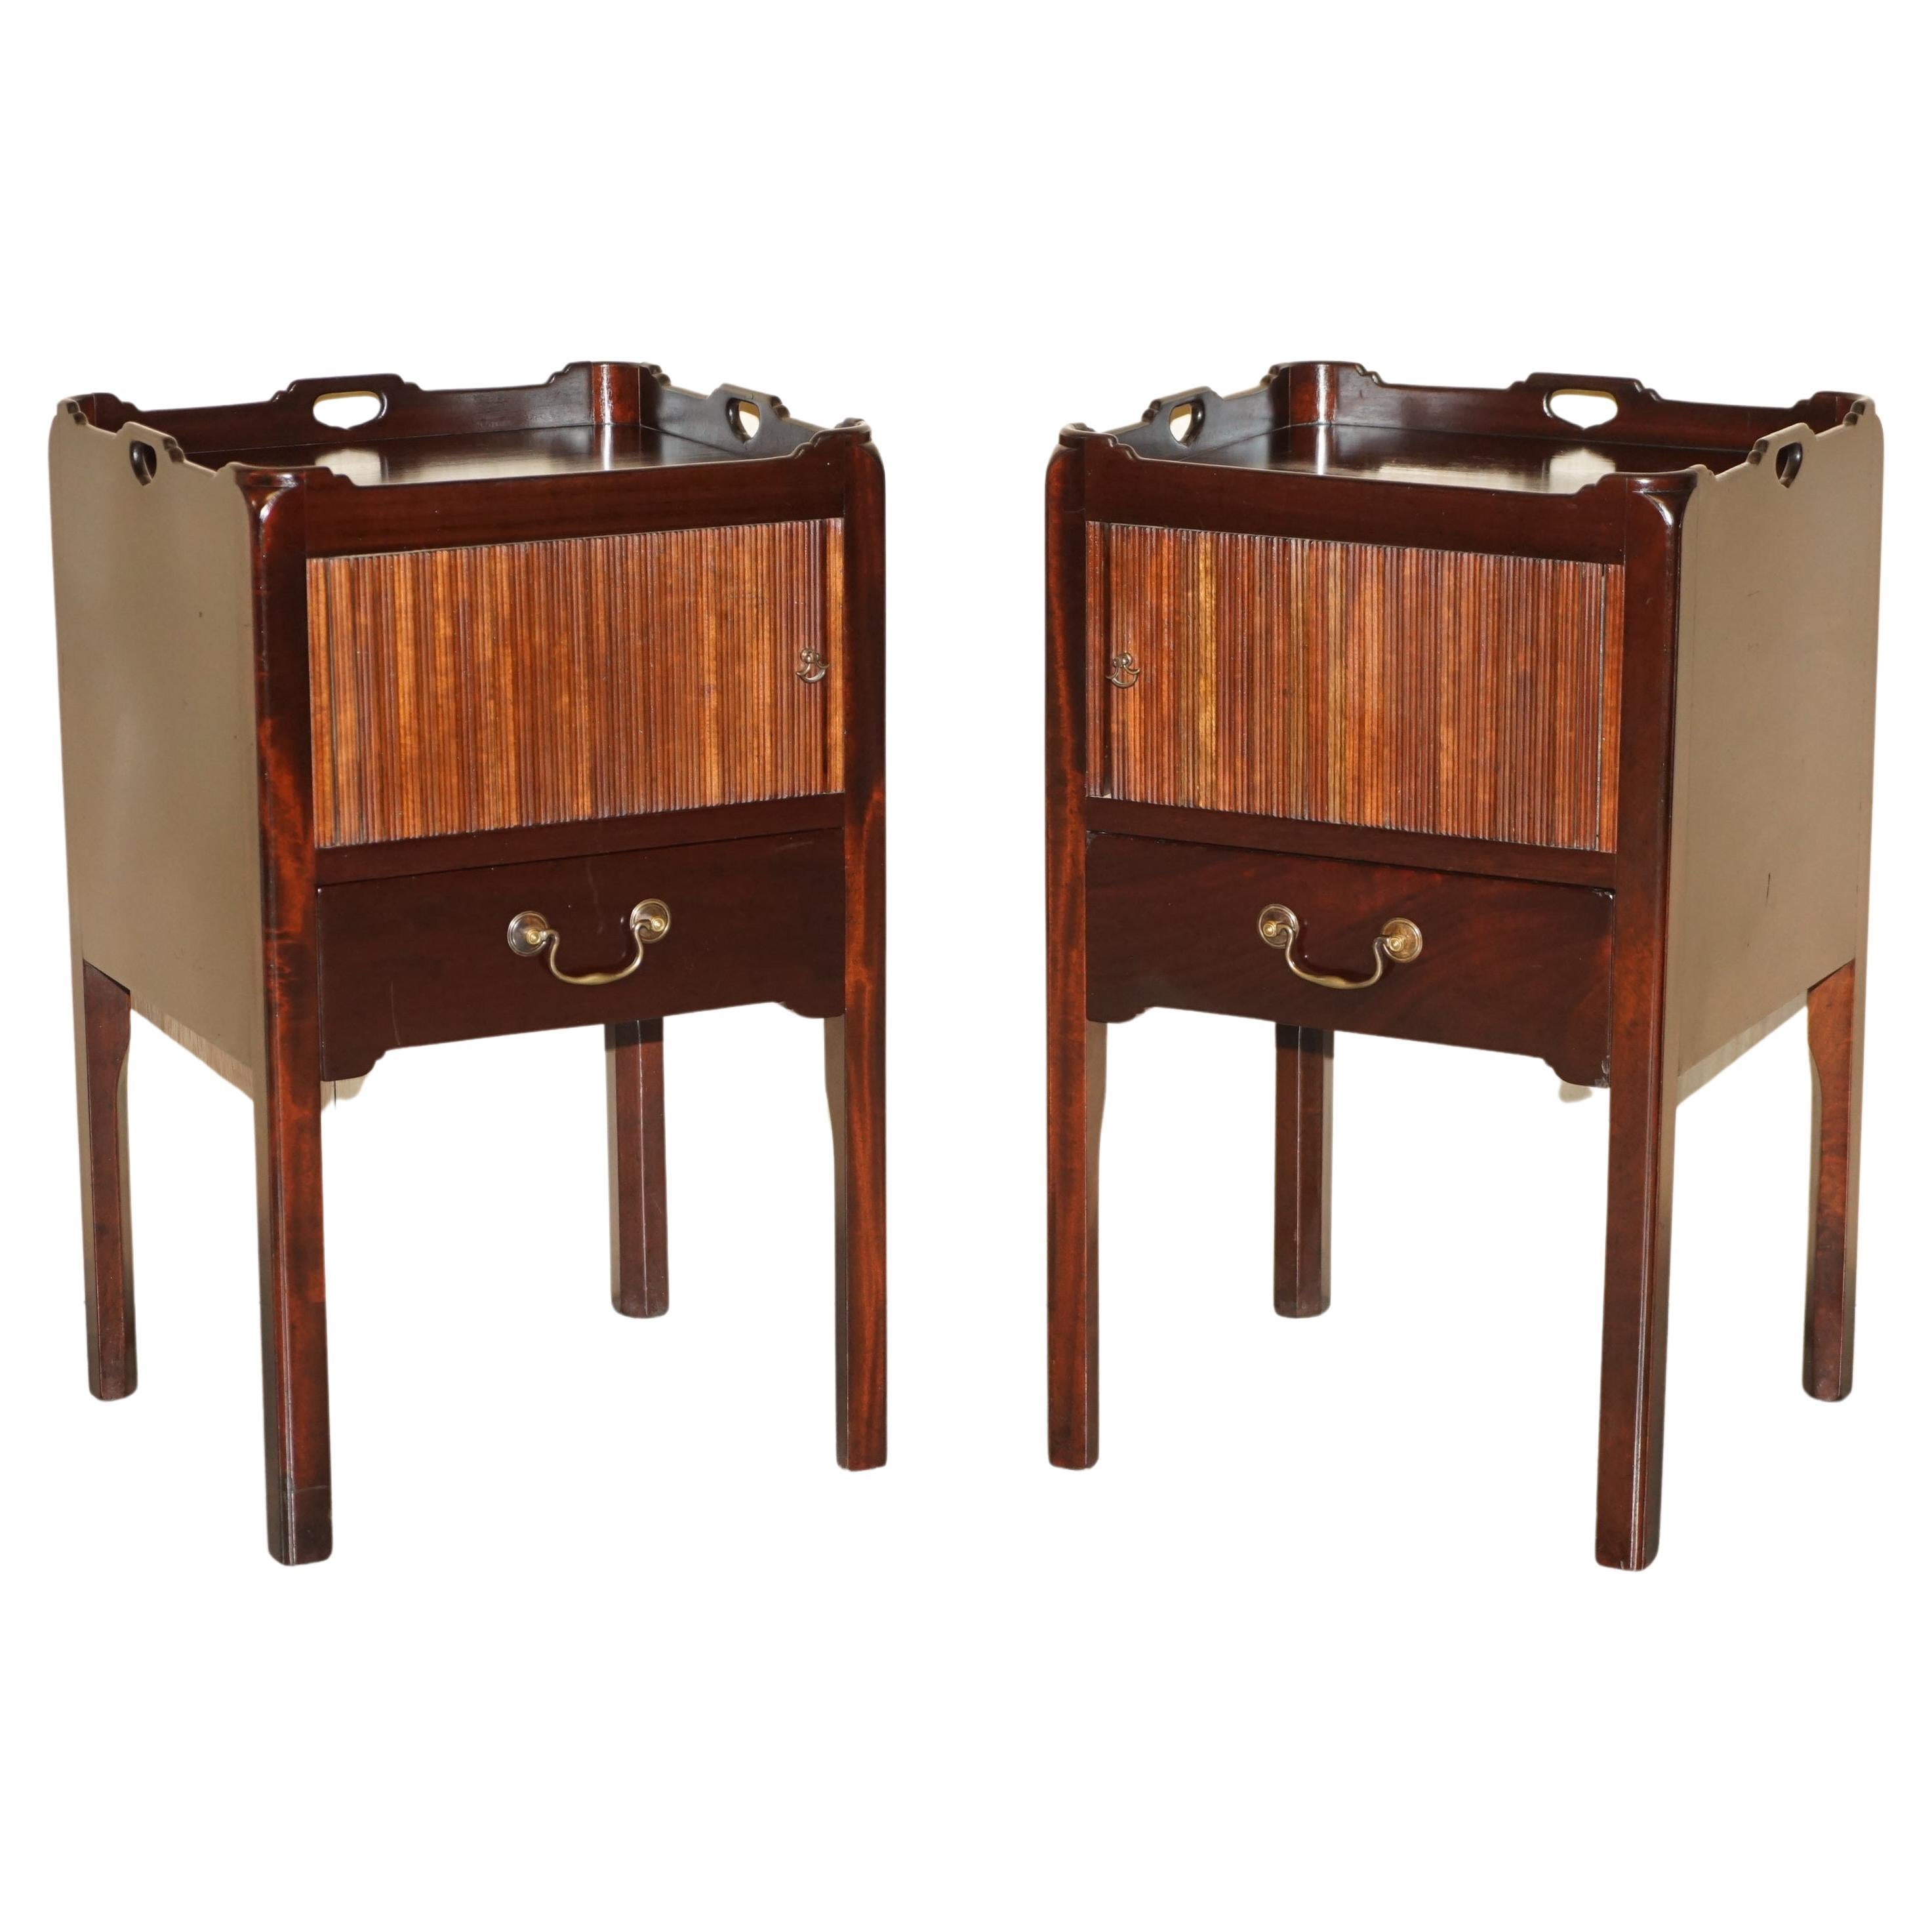 Pair of Antique Georgian circa 1820 George III Tambour Bedside Table Commodes